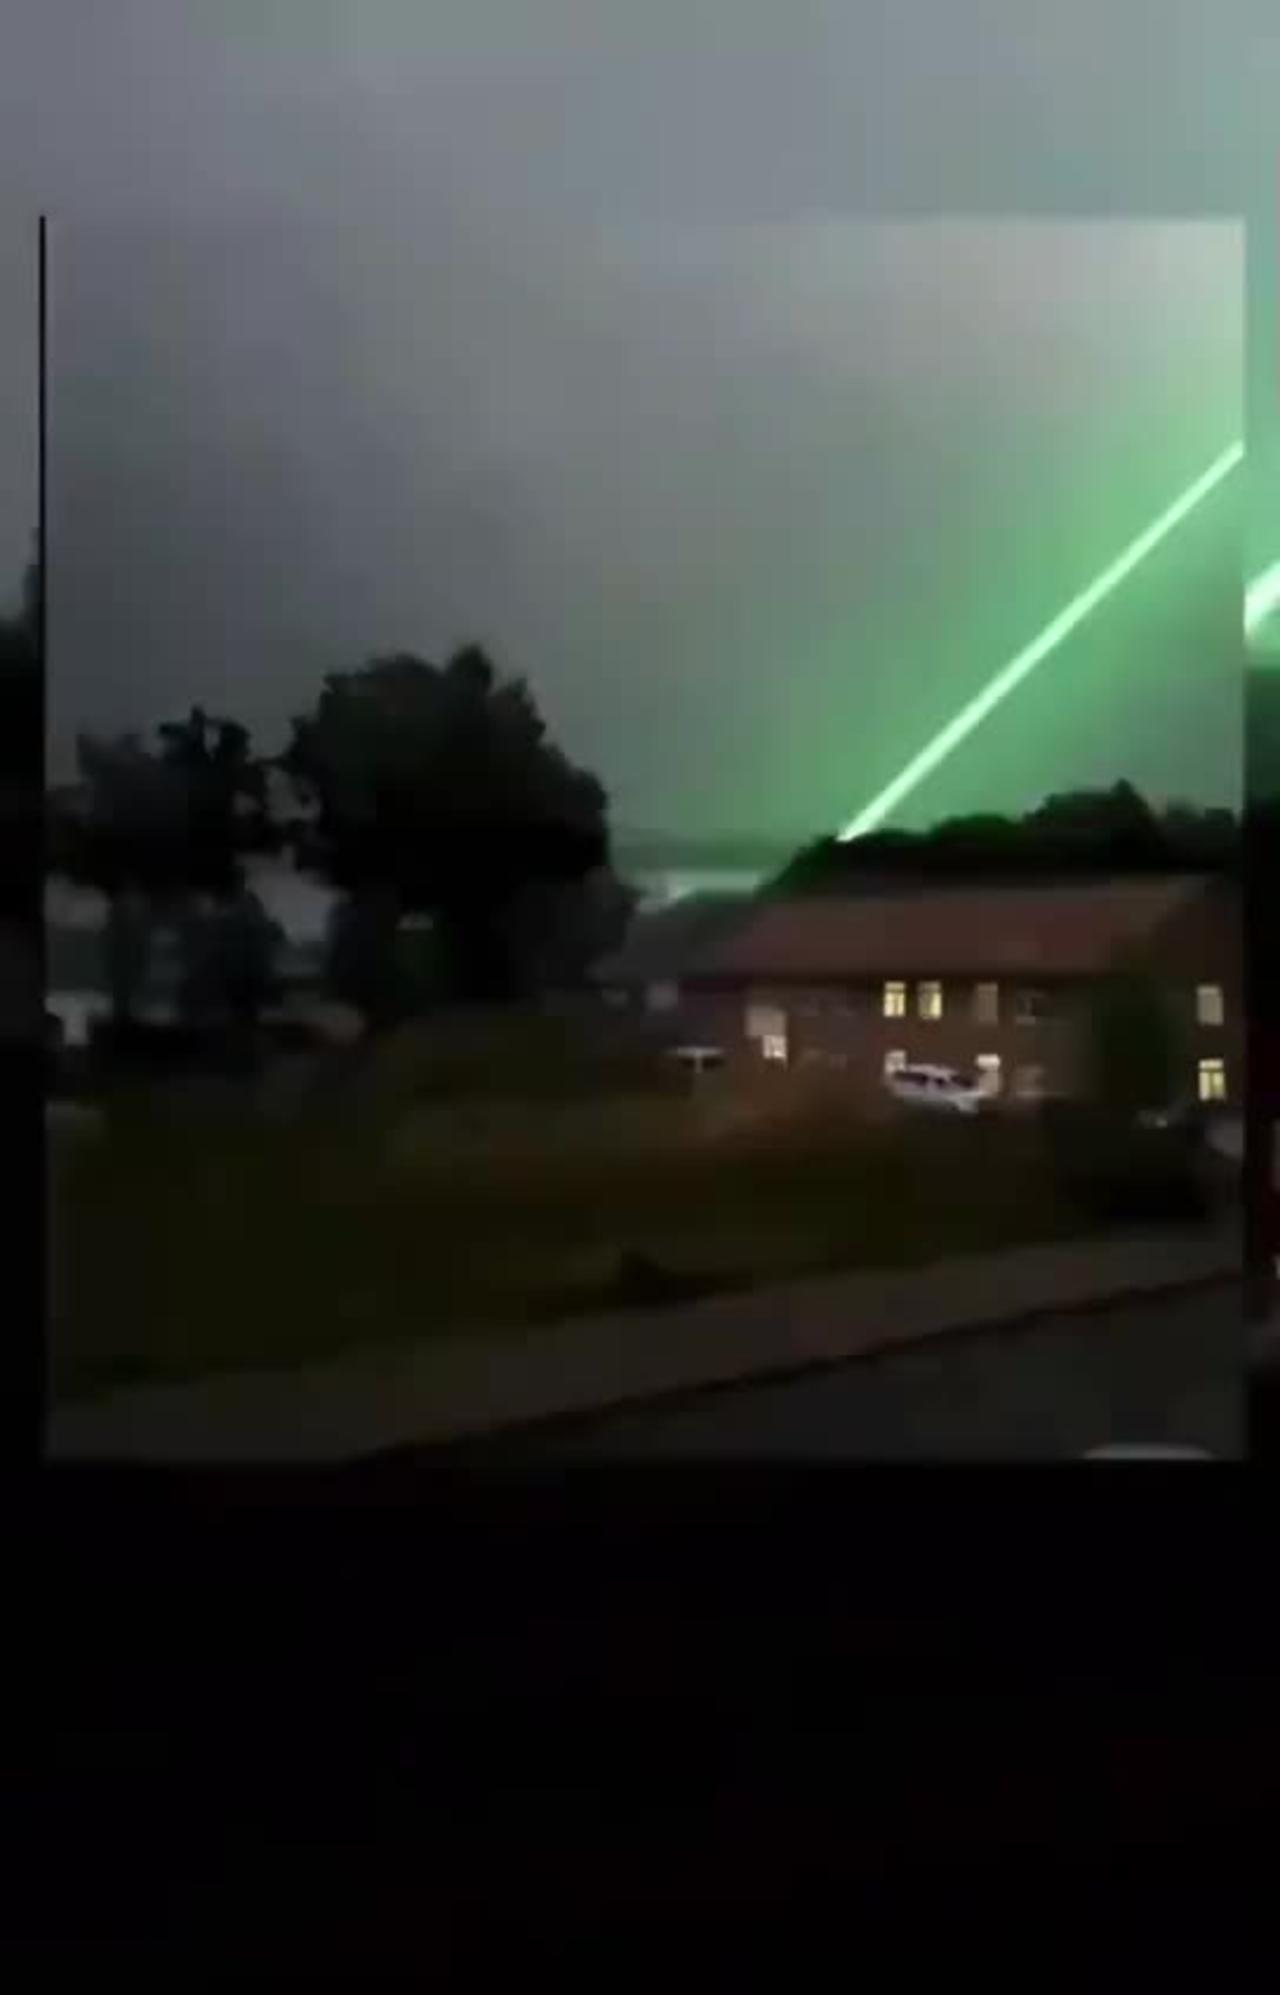 Texas a mysterious green laser..... 1 million acres have burned??